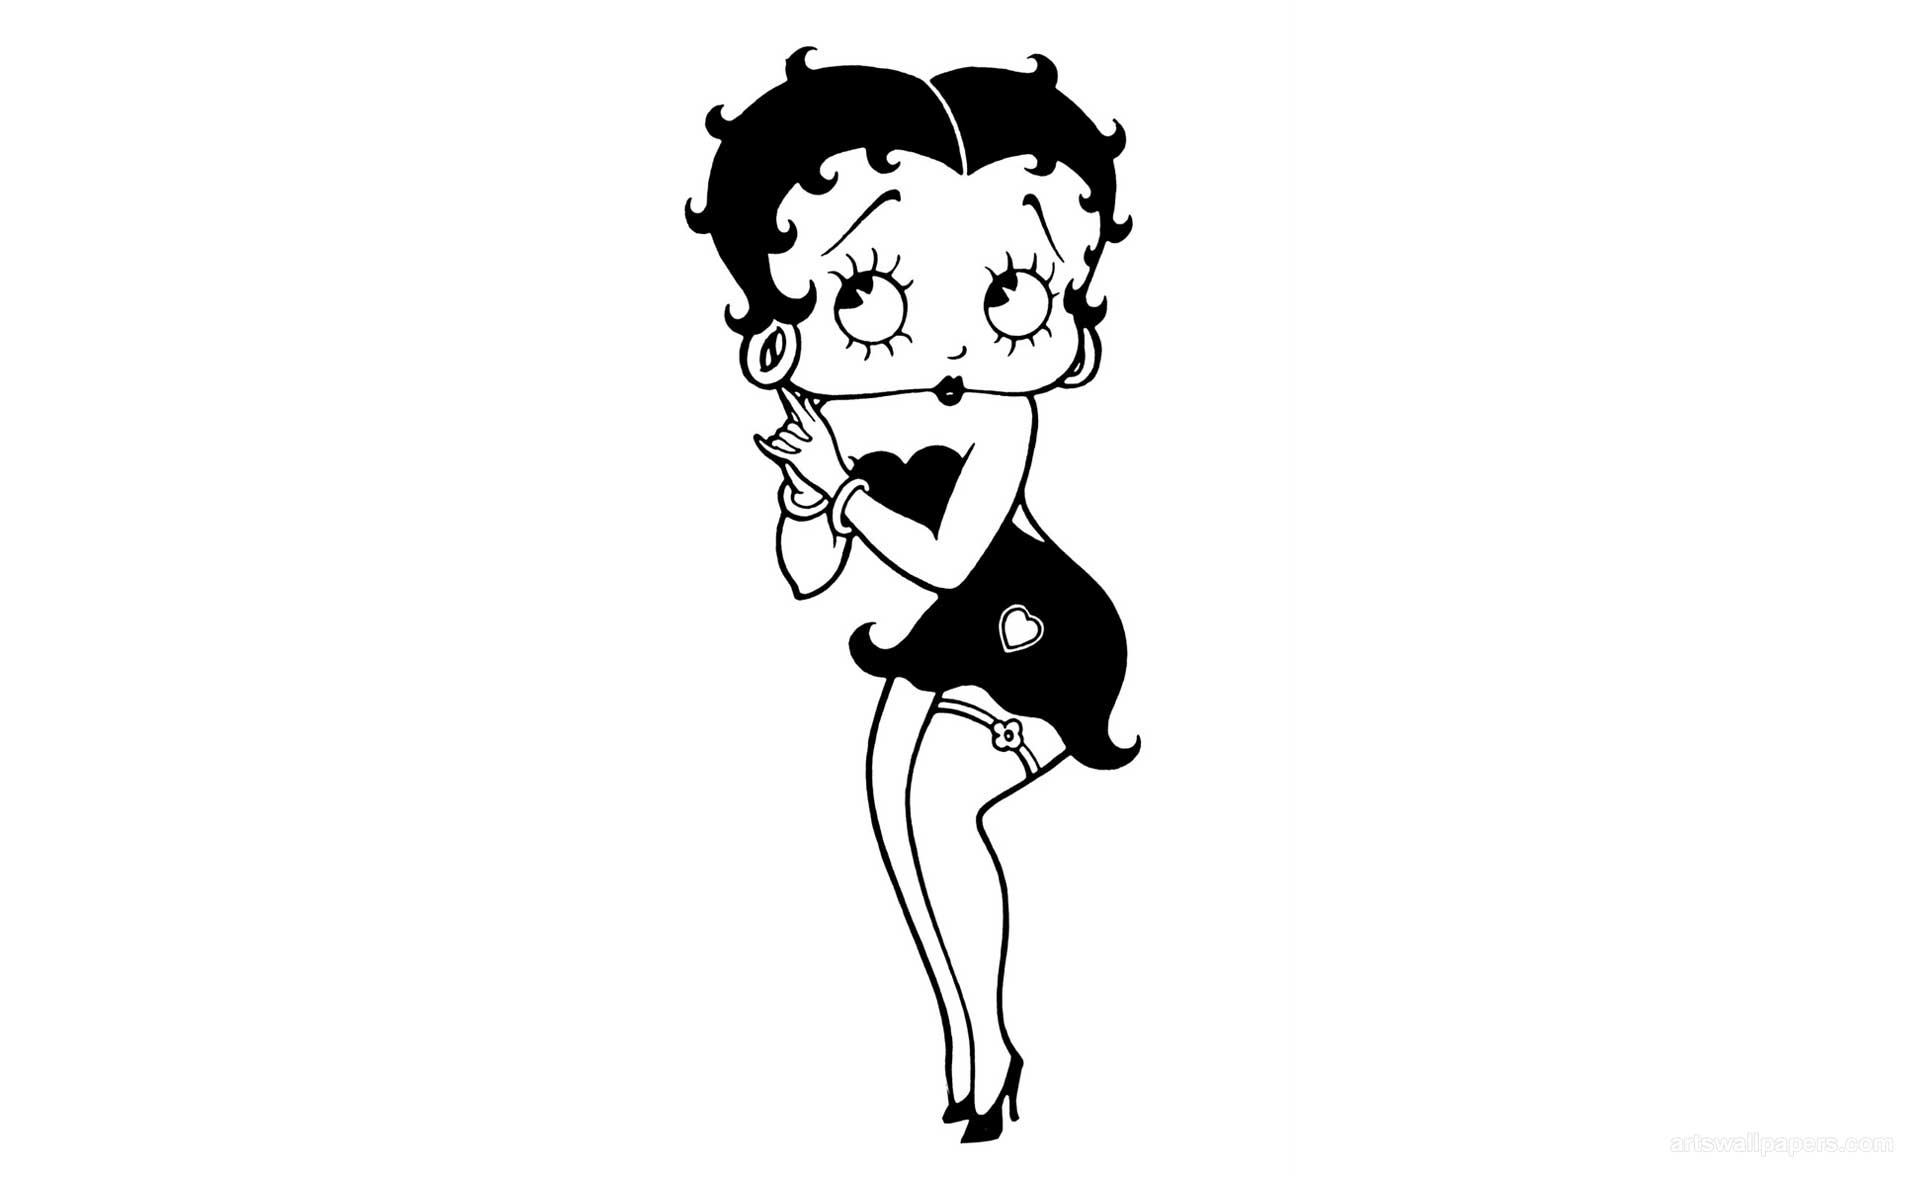 Free Download Betty Boop Wallpaper Images Crazy Gallery 19x10 For Your Desktop Mobile Tablet Explore 50 Free Betty Boop Desktop Wallpaper Betty Boop Desktop Wallpaper Betty Boop Wallpapers All